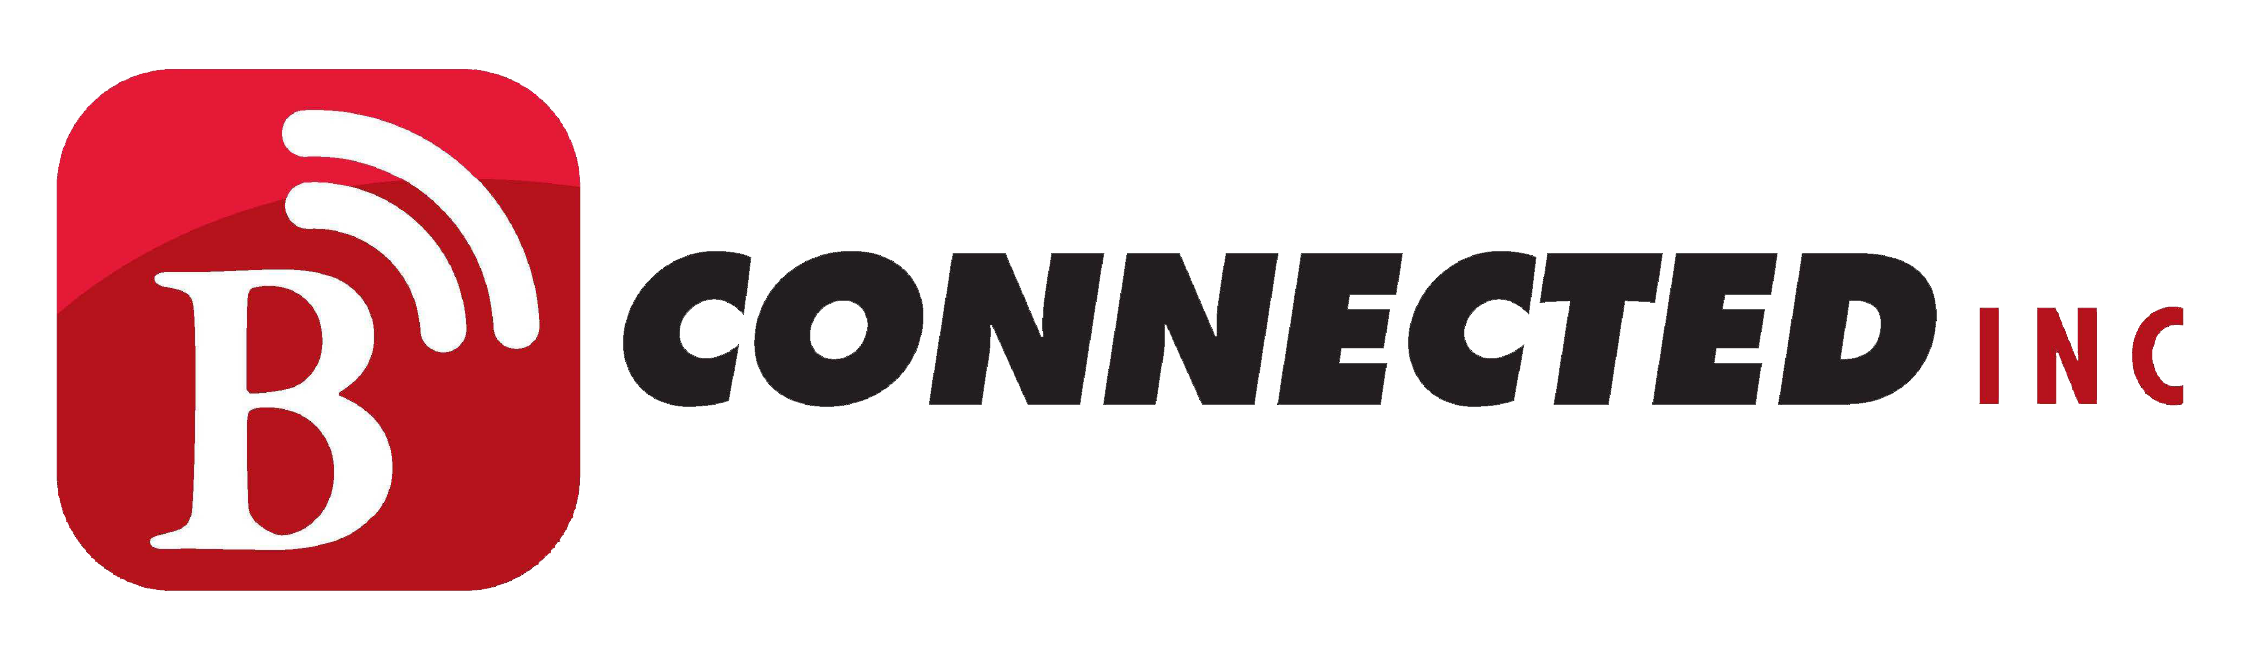 Bconnect official logo with no background